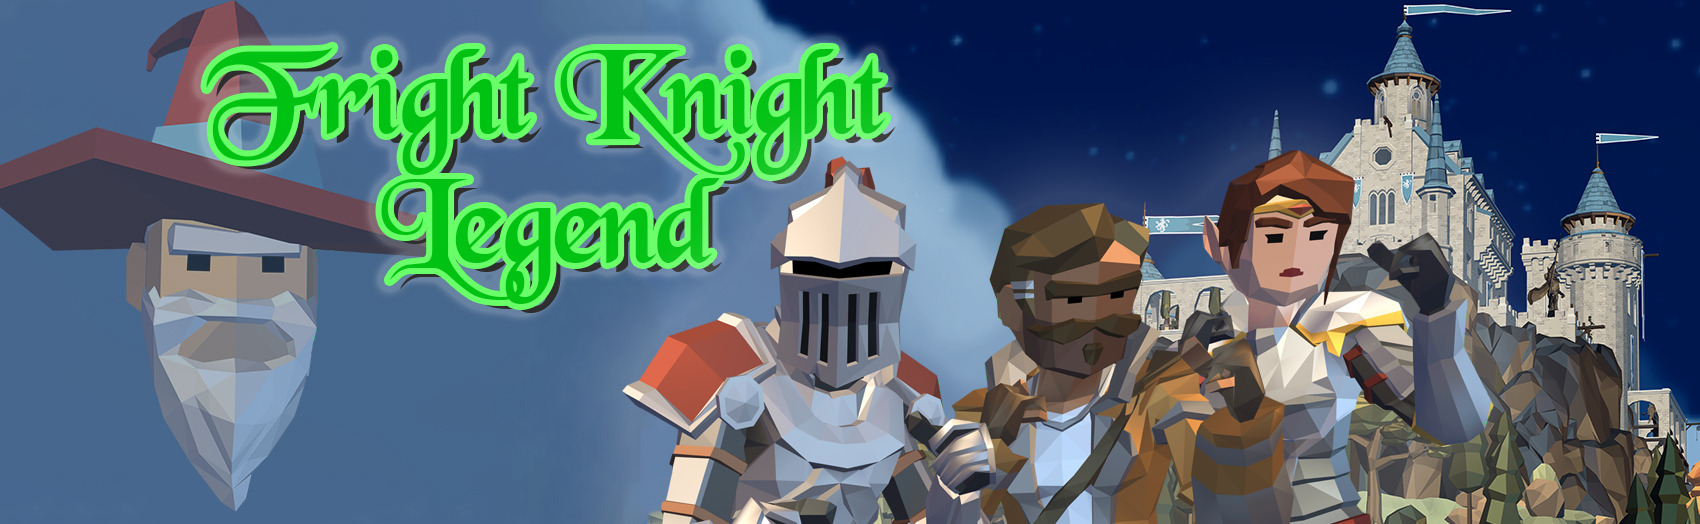 Fright Knight Legend Game Banner